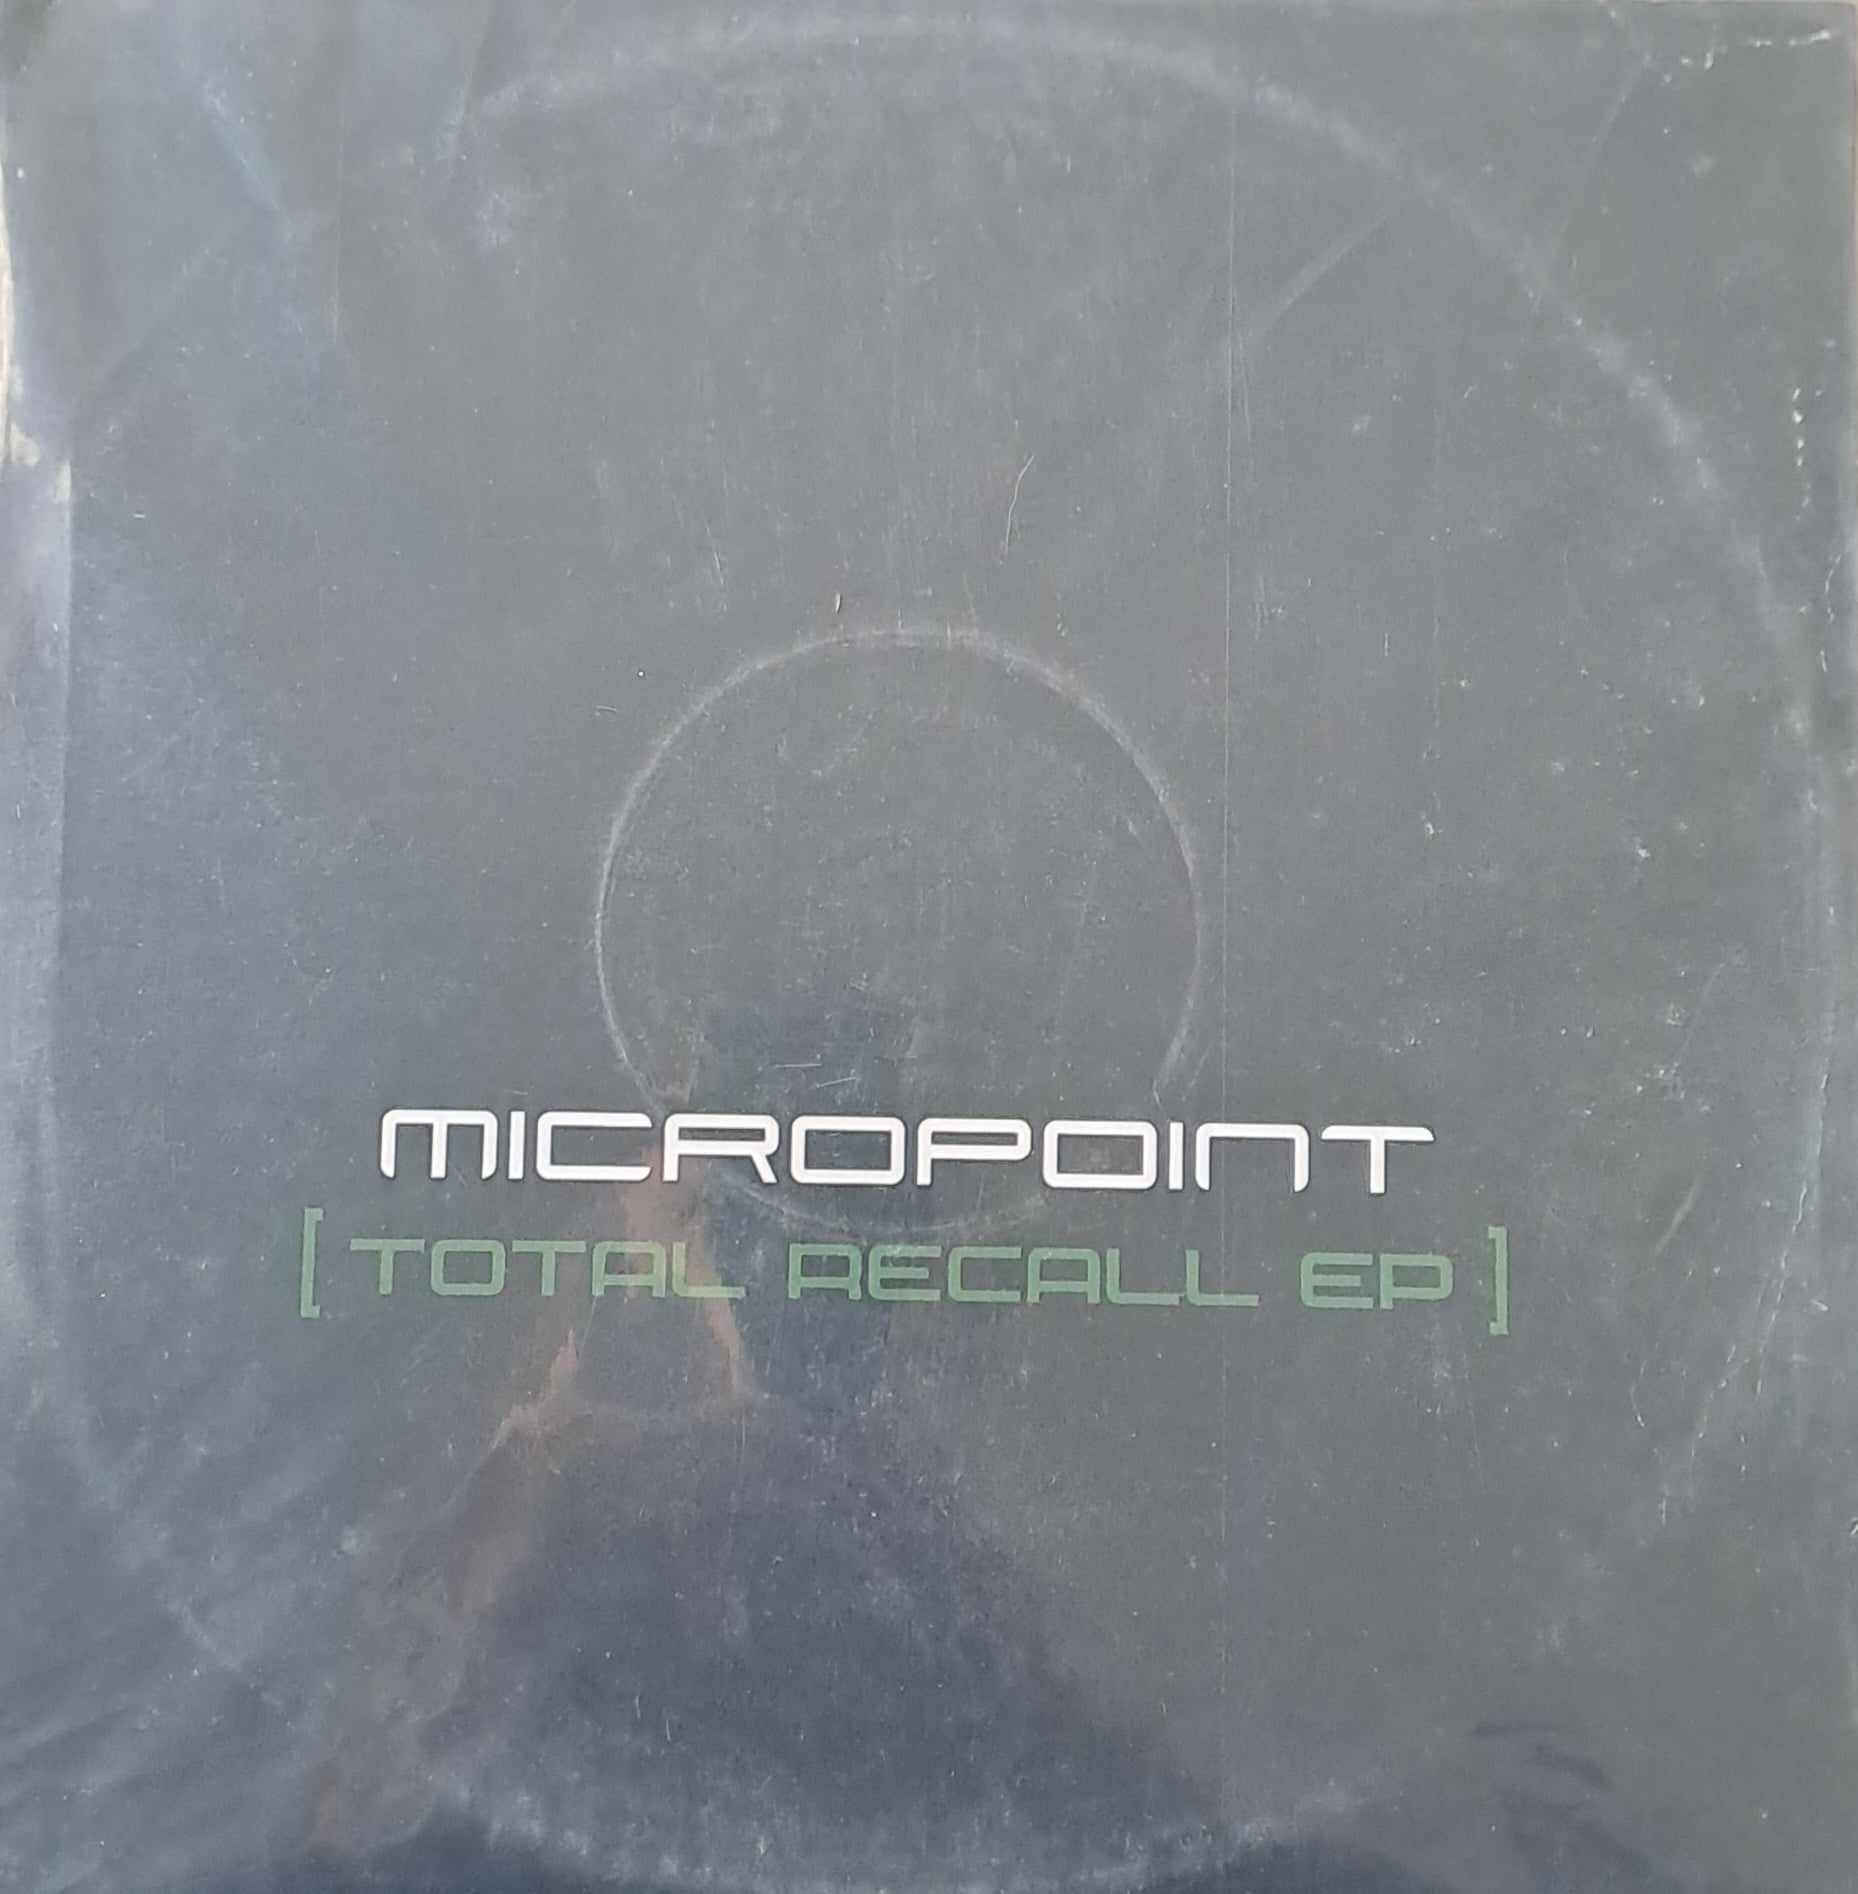 Micropoint Records 01 (Total Recall EP) - vinyle hardcore